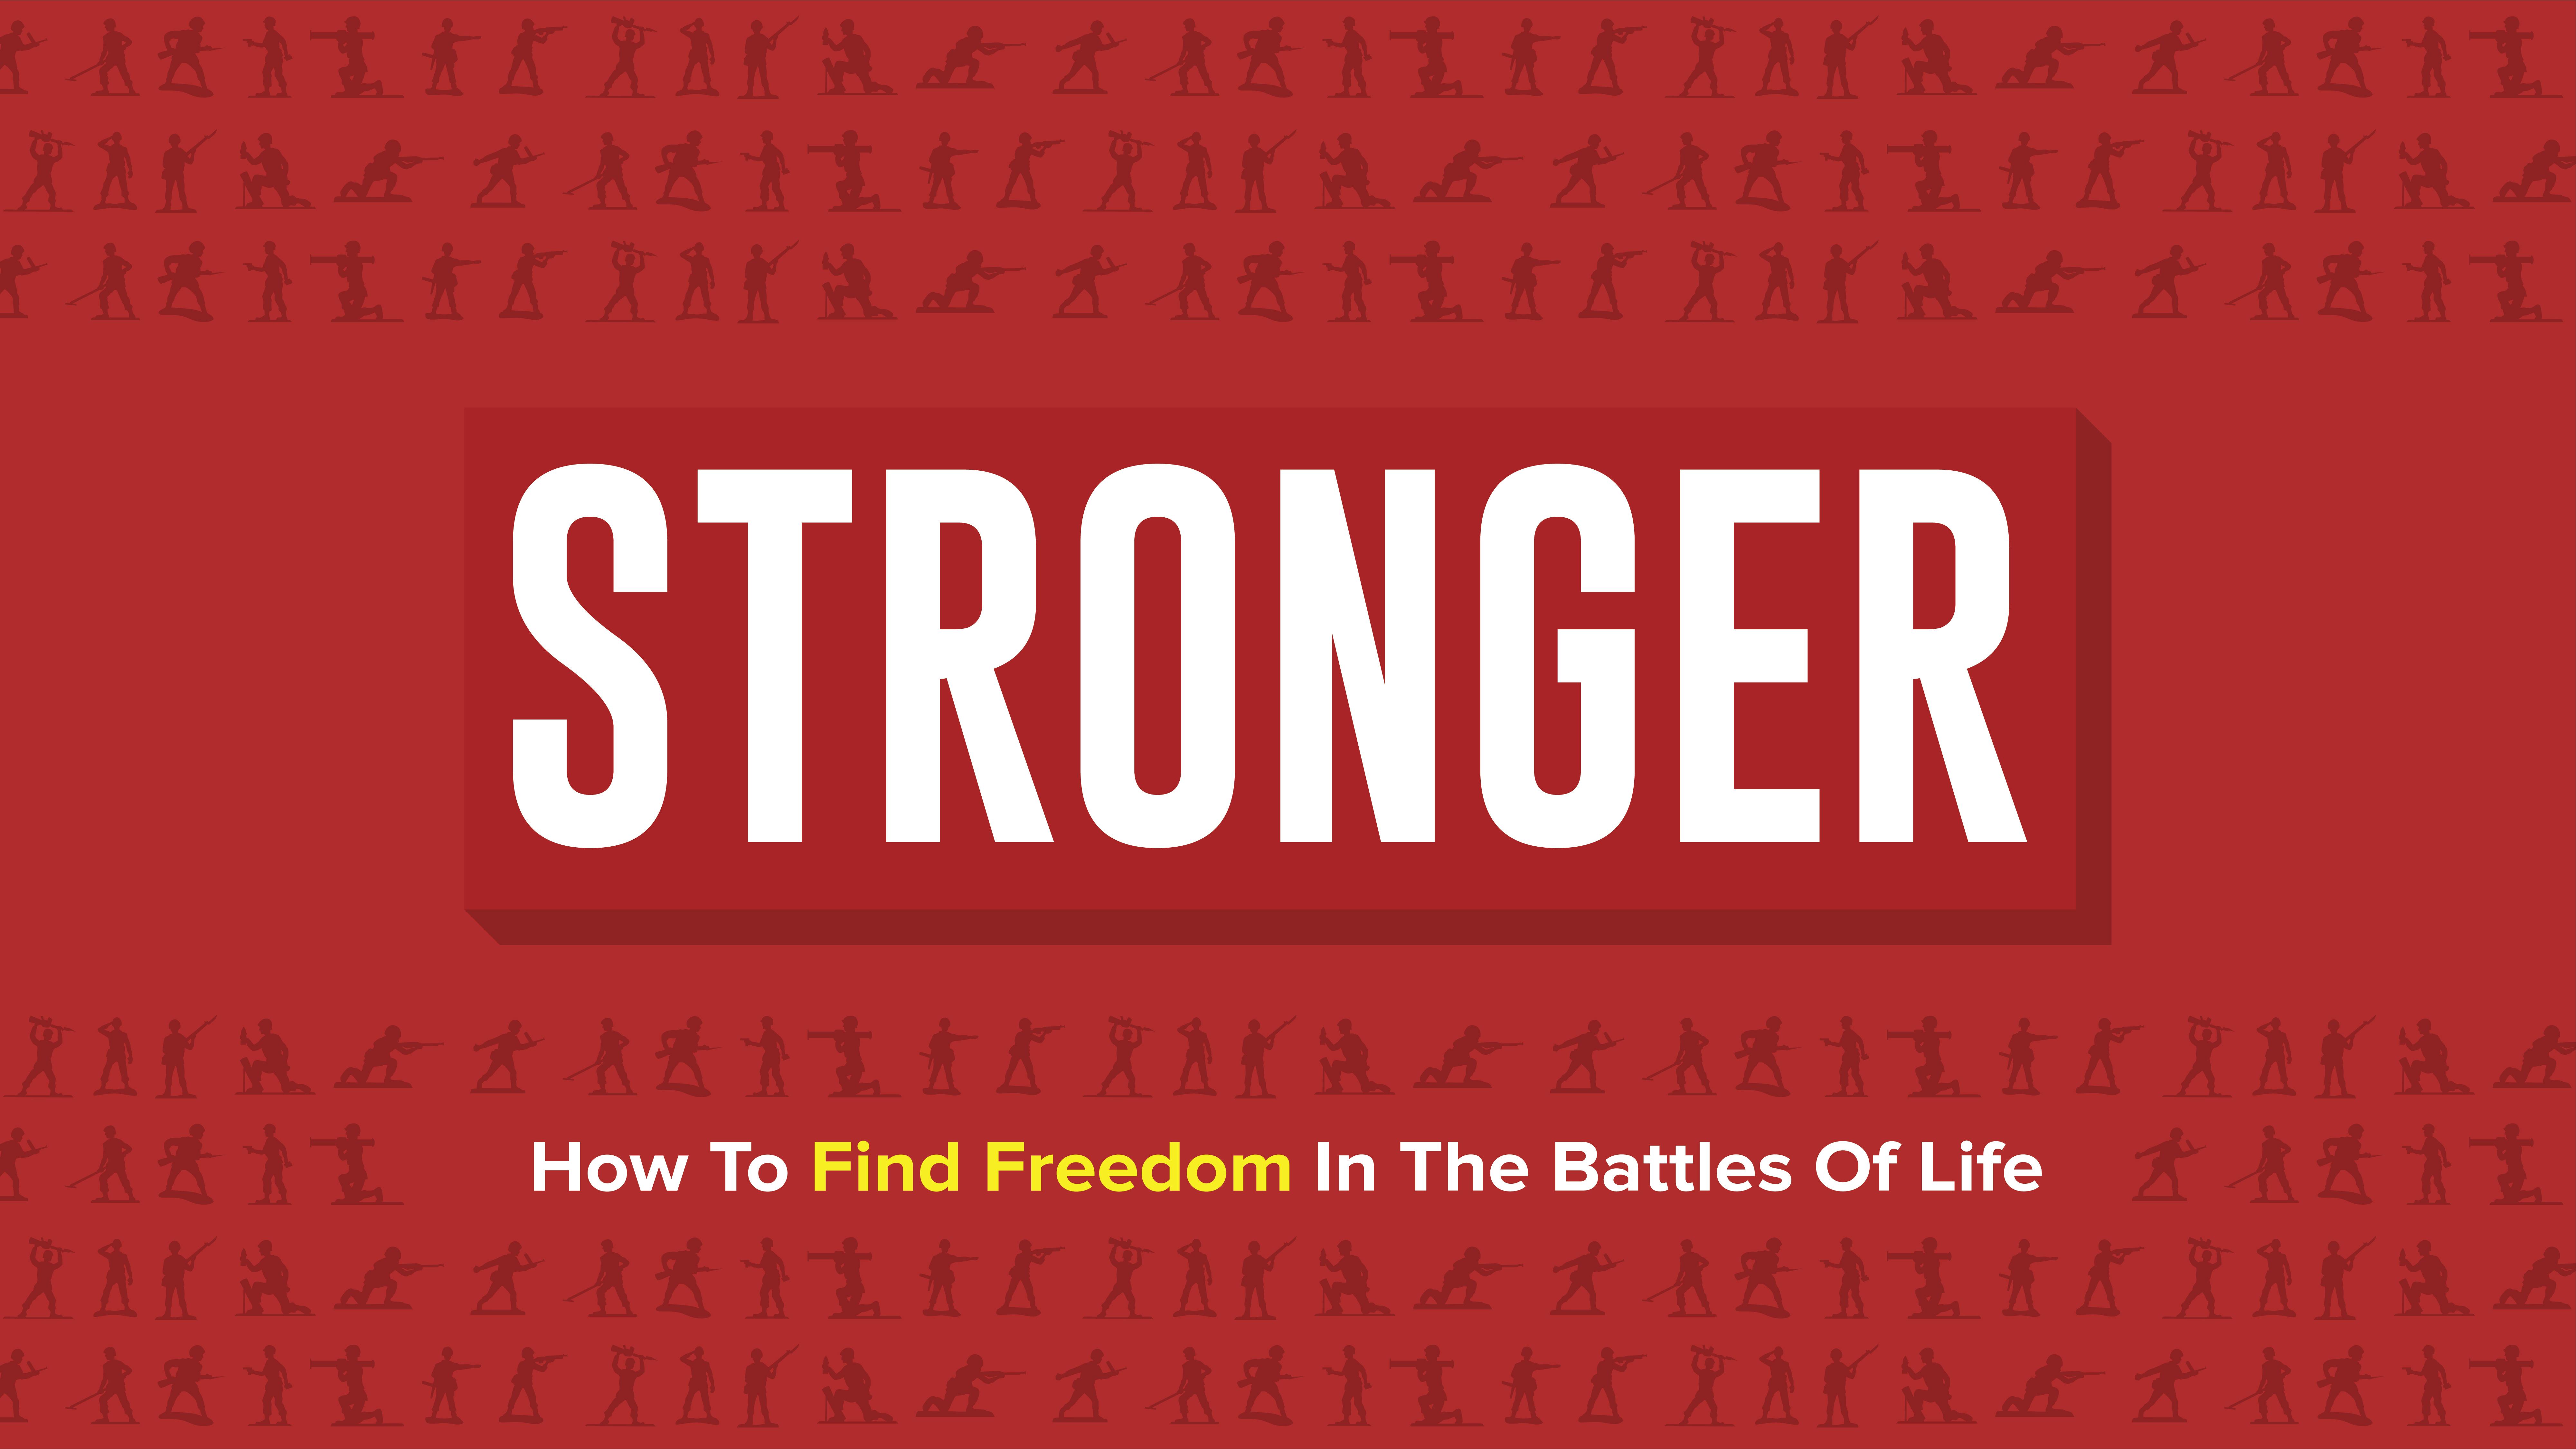 Stronger - How to Find Freedom in the Battles of Life